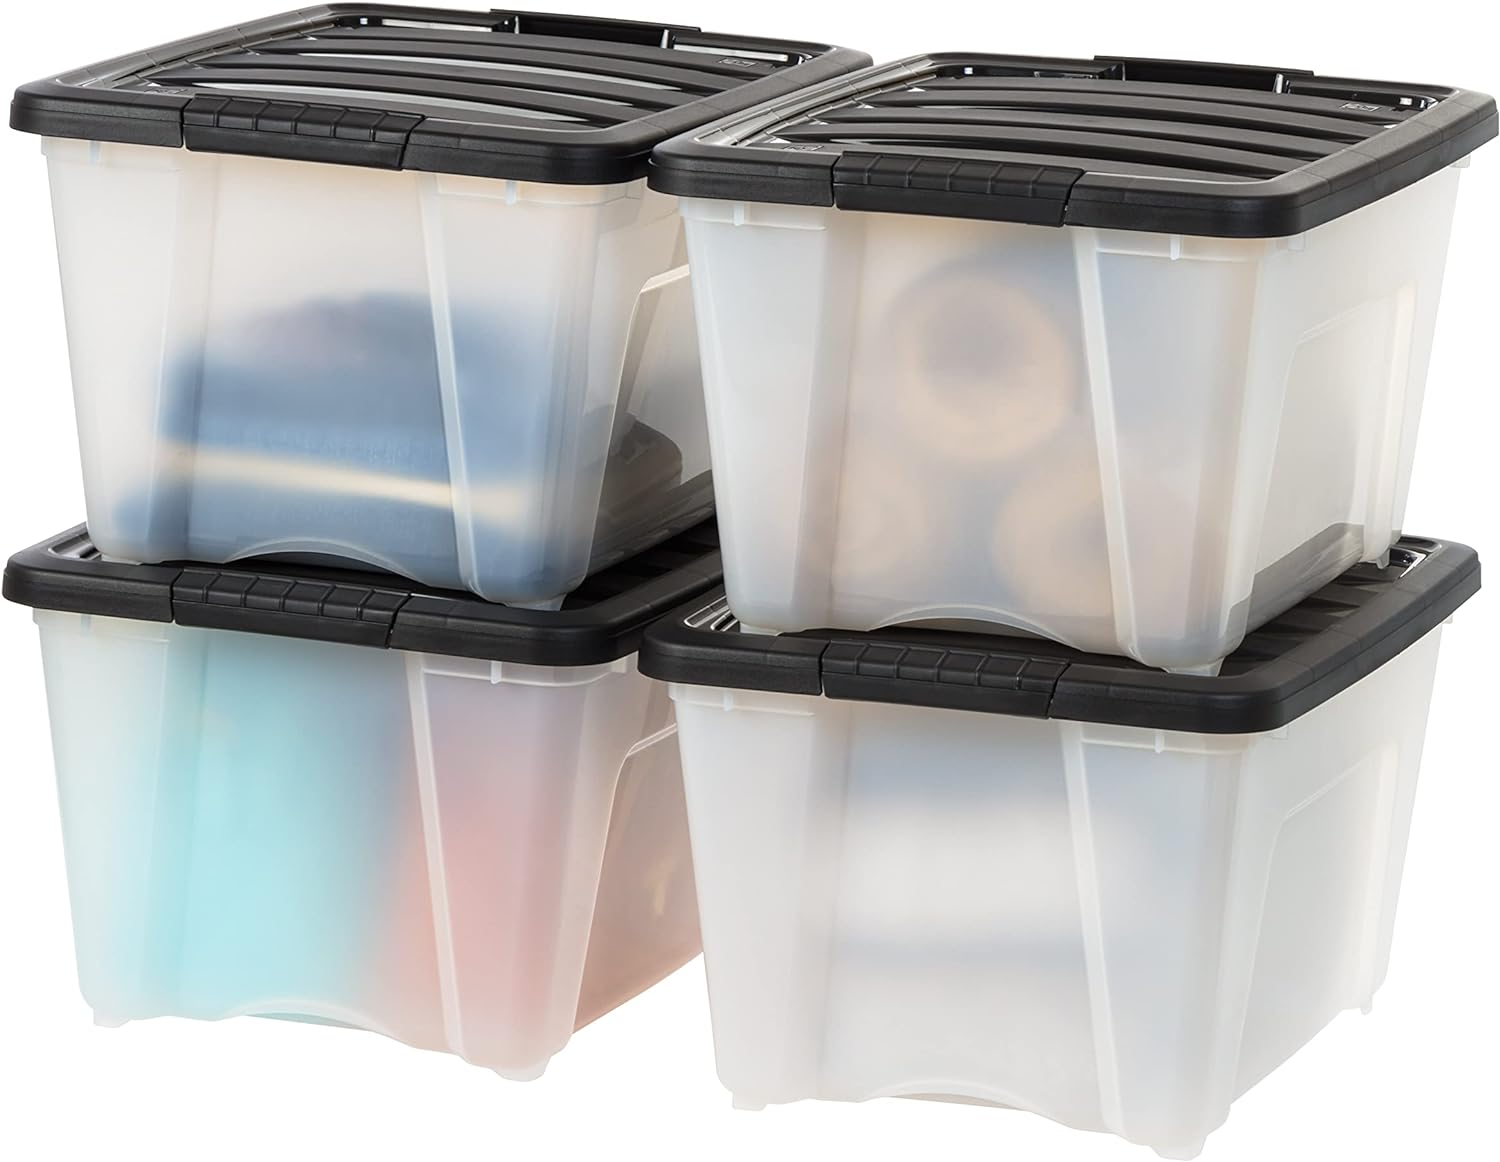 https://discounttoday.net/wp-content/uploads/2023/10/IRIS-USA-4-Pack-32qt-Clear-View-Plastic-Storage-Bin-with-Lid-and-Secure-Latching-Buckles-ClearBlack.jpg